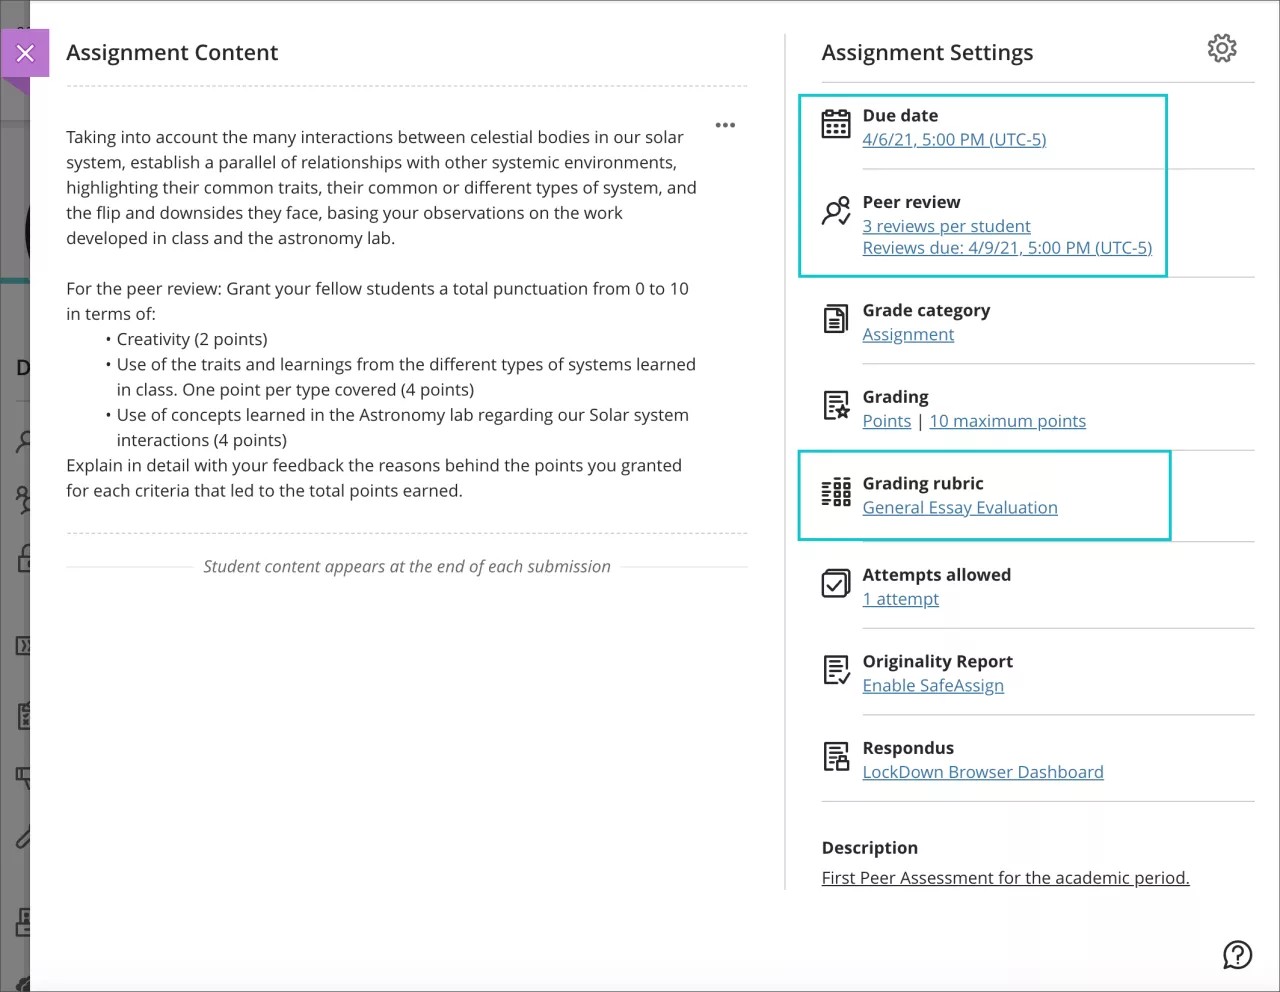 The Assignment settings panel is open with the "Due date", "Peer review", and "Grading rubric" options displayed. 